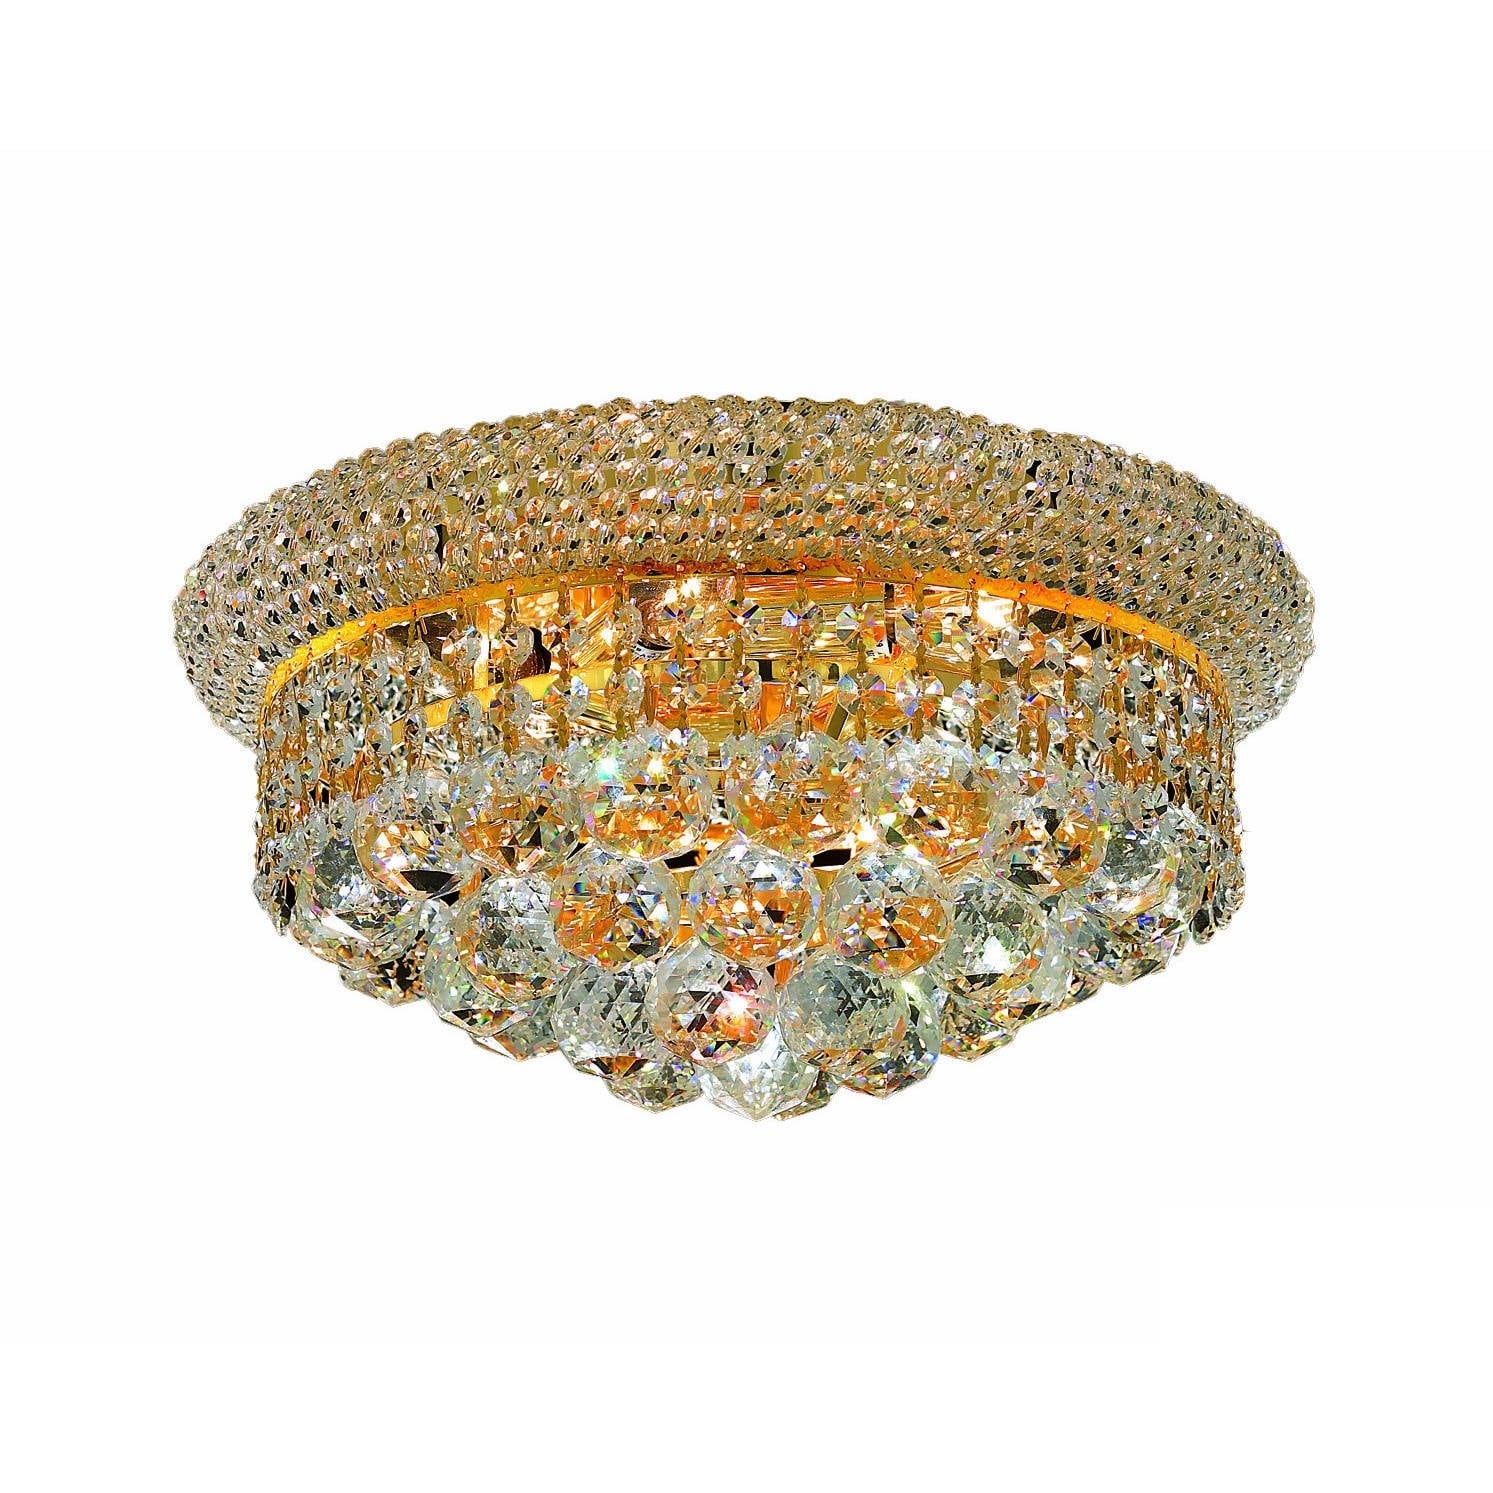 Christopher Knight Home Geneva 6 light Royal Cut Crystal And Gold Flush Mount (Crystal and AluminumFinish GoldNumber of lights Six (6)Requires six (6) 60 watt max bulb (not included)Bulb type E12, 110 Volt 125 VoltDimensions 14 inches long x 14 inches